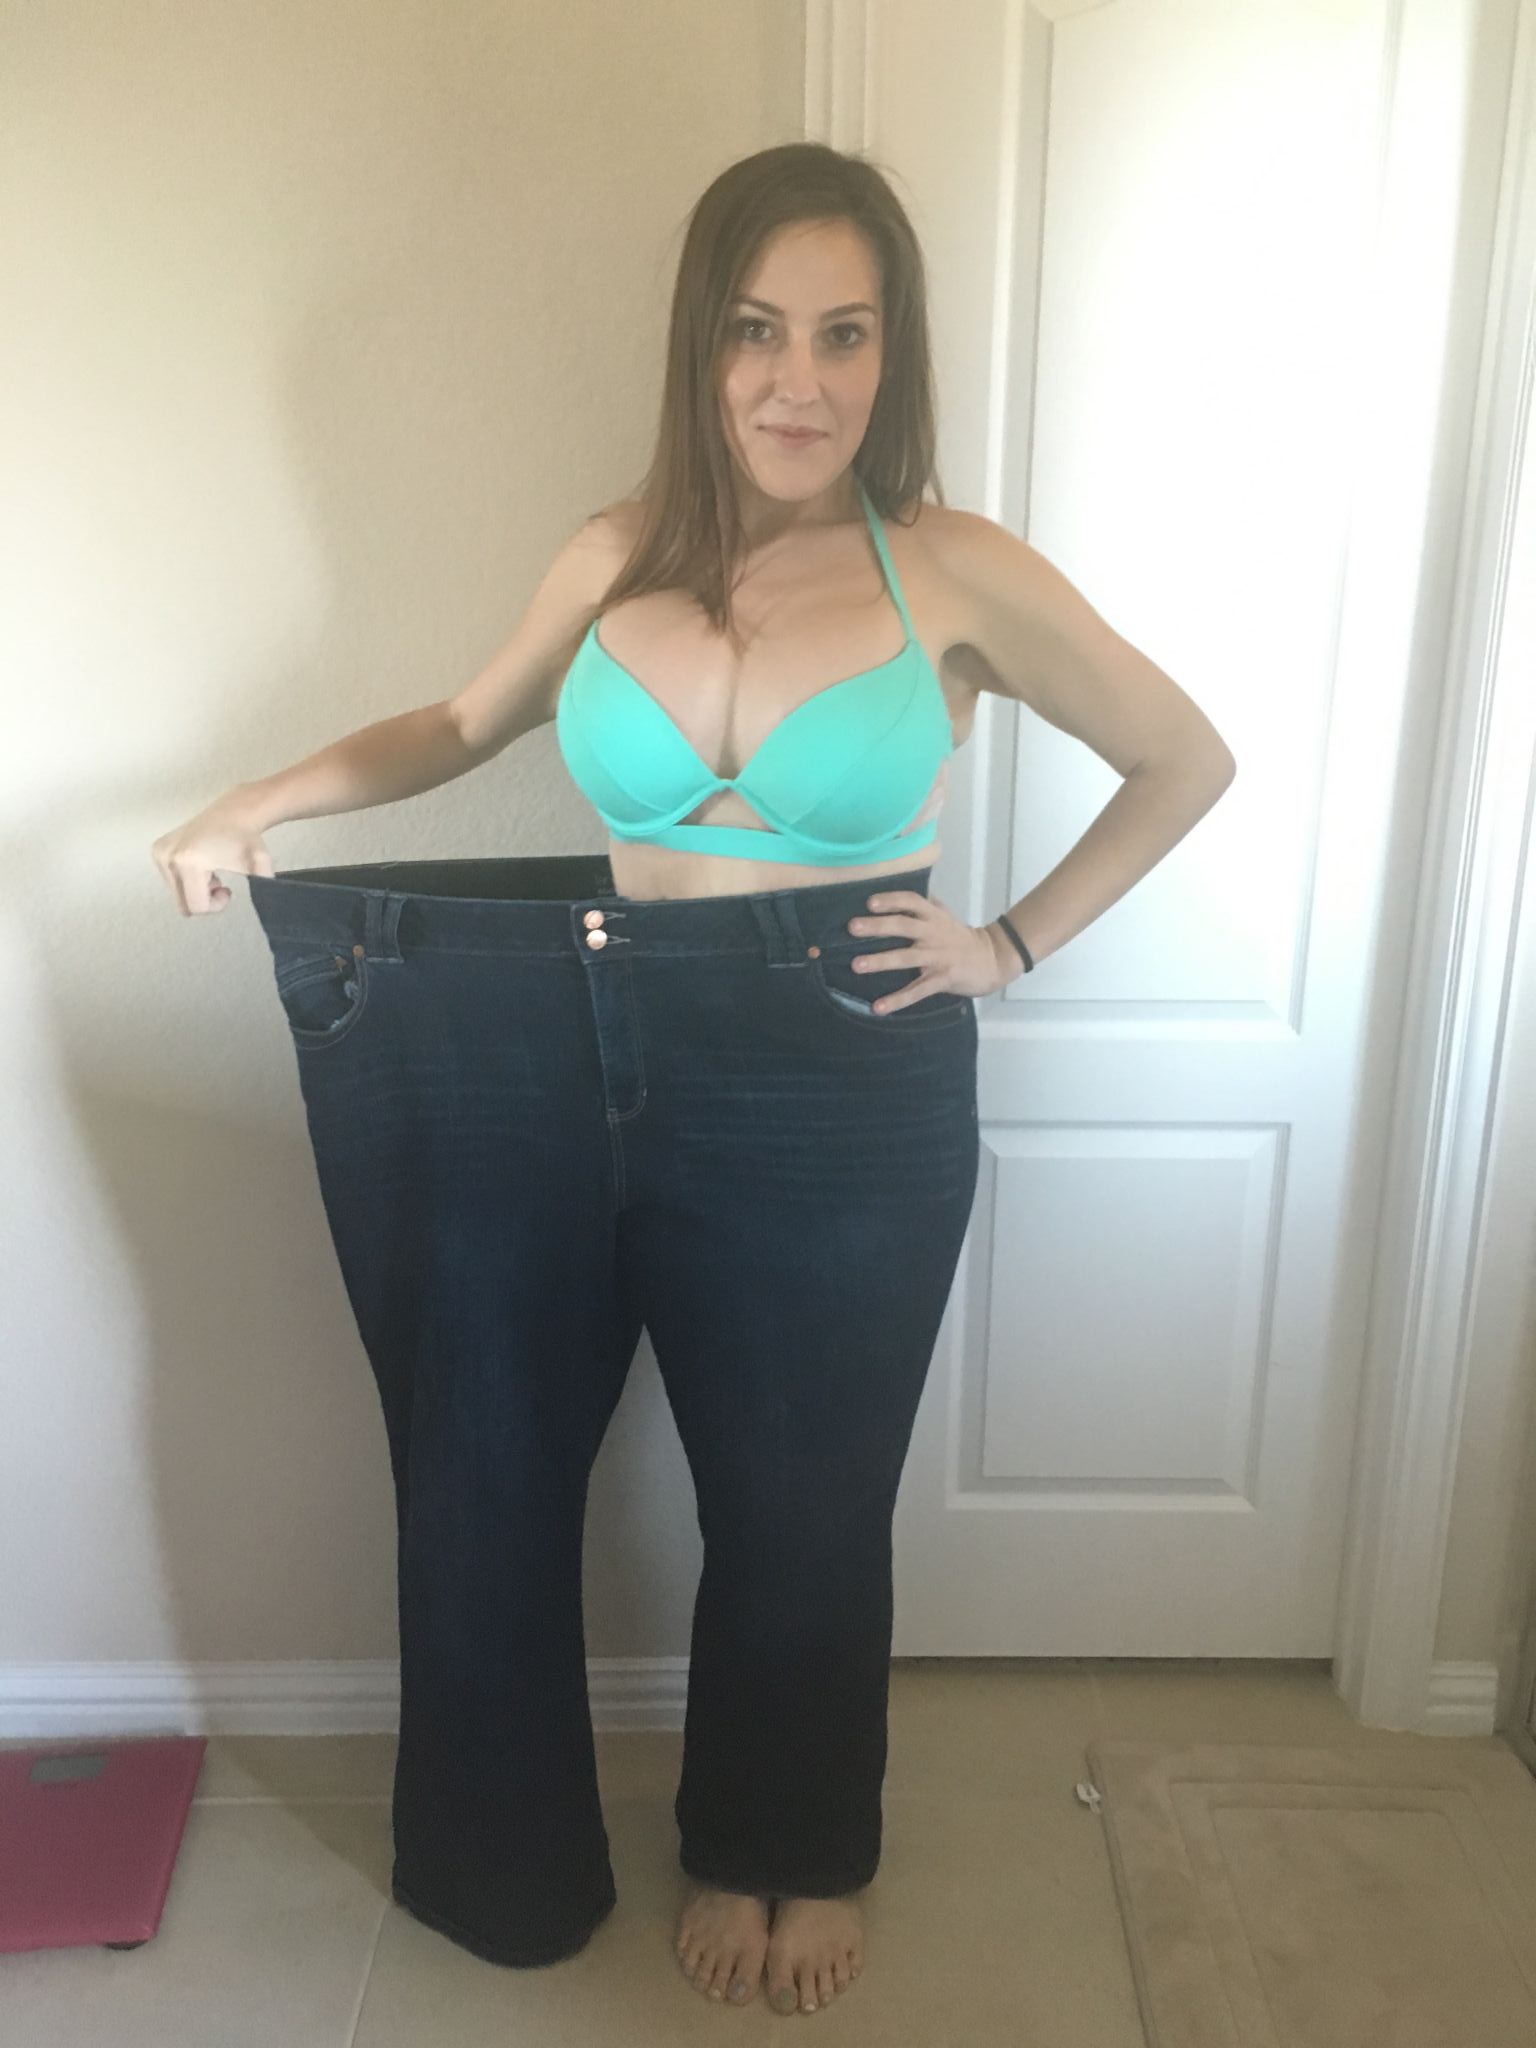 Woman drops more than 200 pounds, spends $12,000 on 'dream body' - San